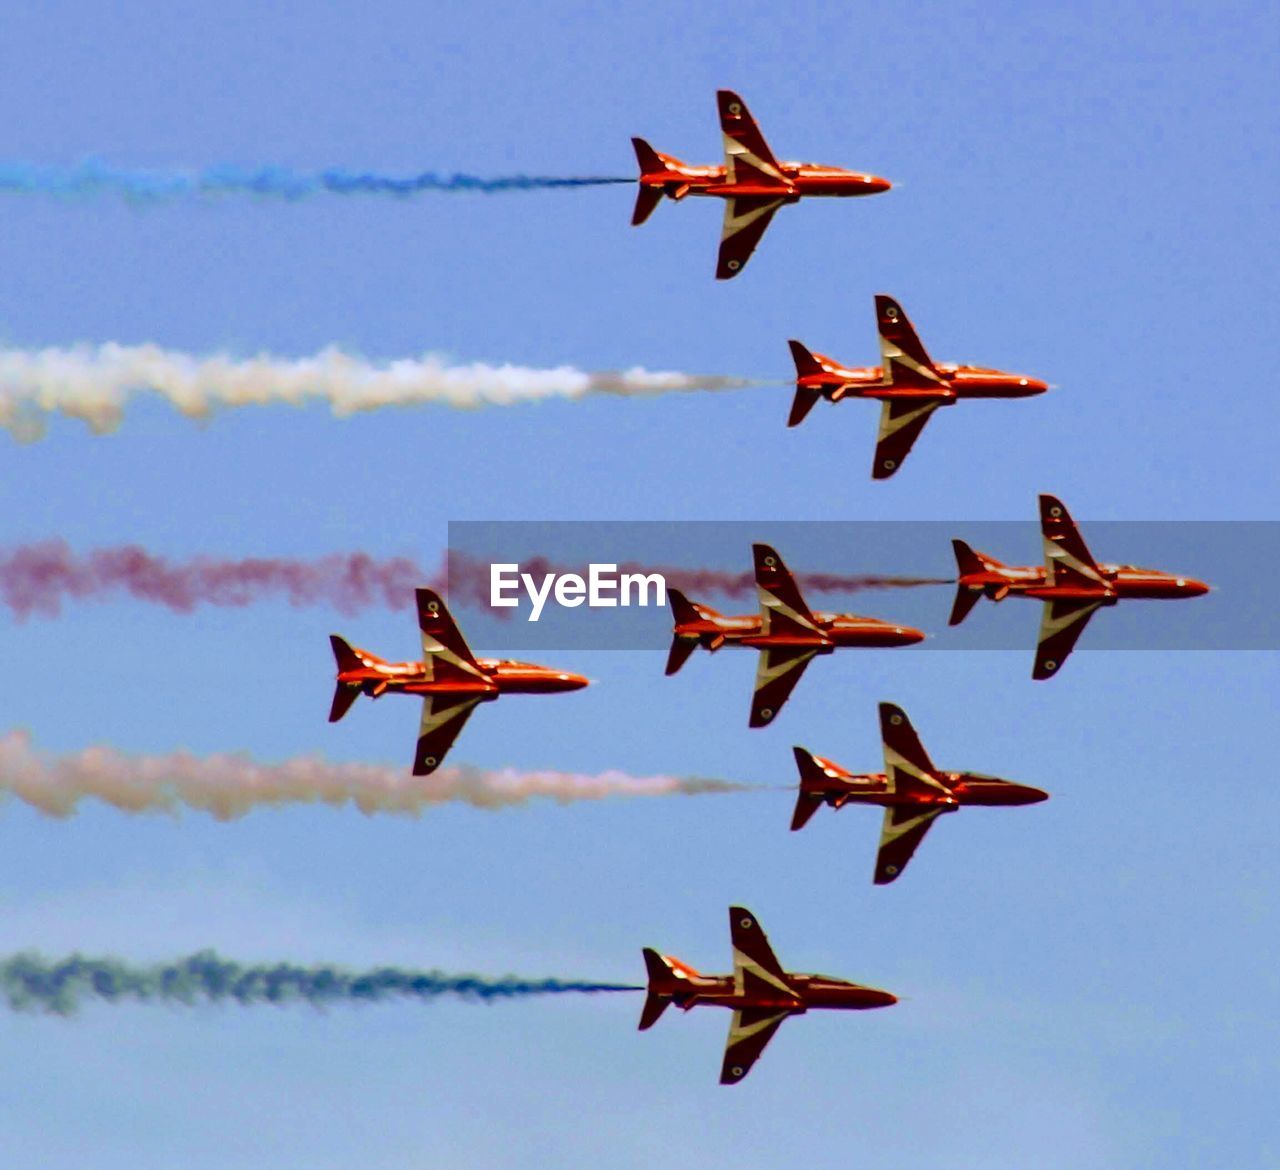 LOW ANGLE VIEW OF AIRSHOW IN FLIGHT AGAINST SKY